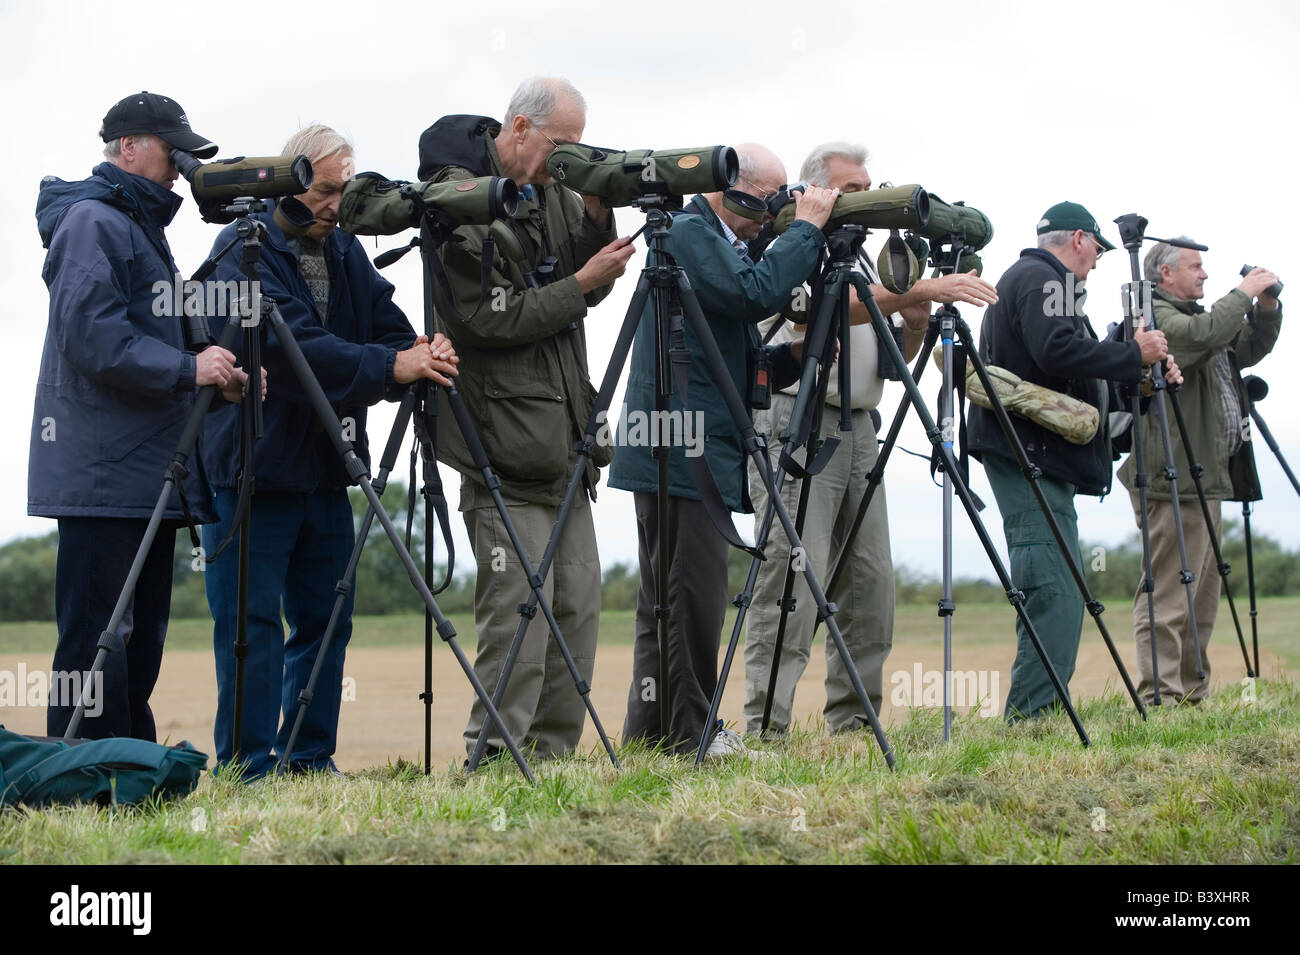 A group of twitchers armed with telescopes on tripods look for a rare bird near York Yorkshire UK Stock Photo